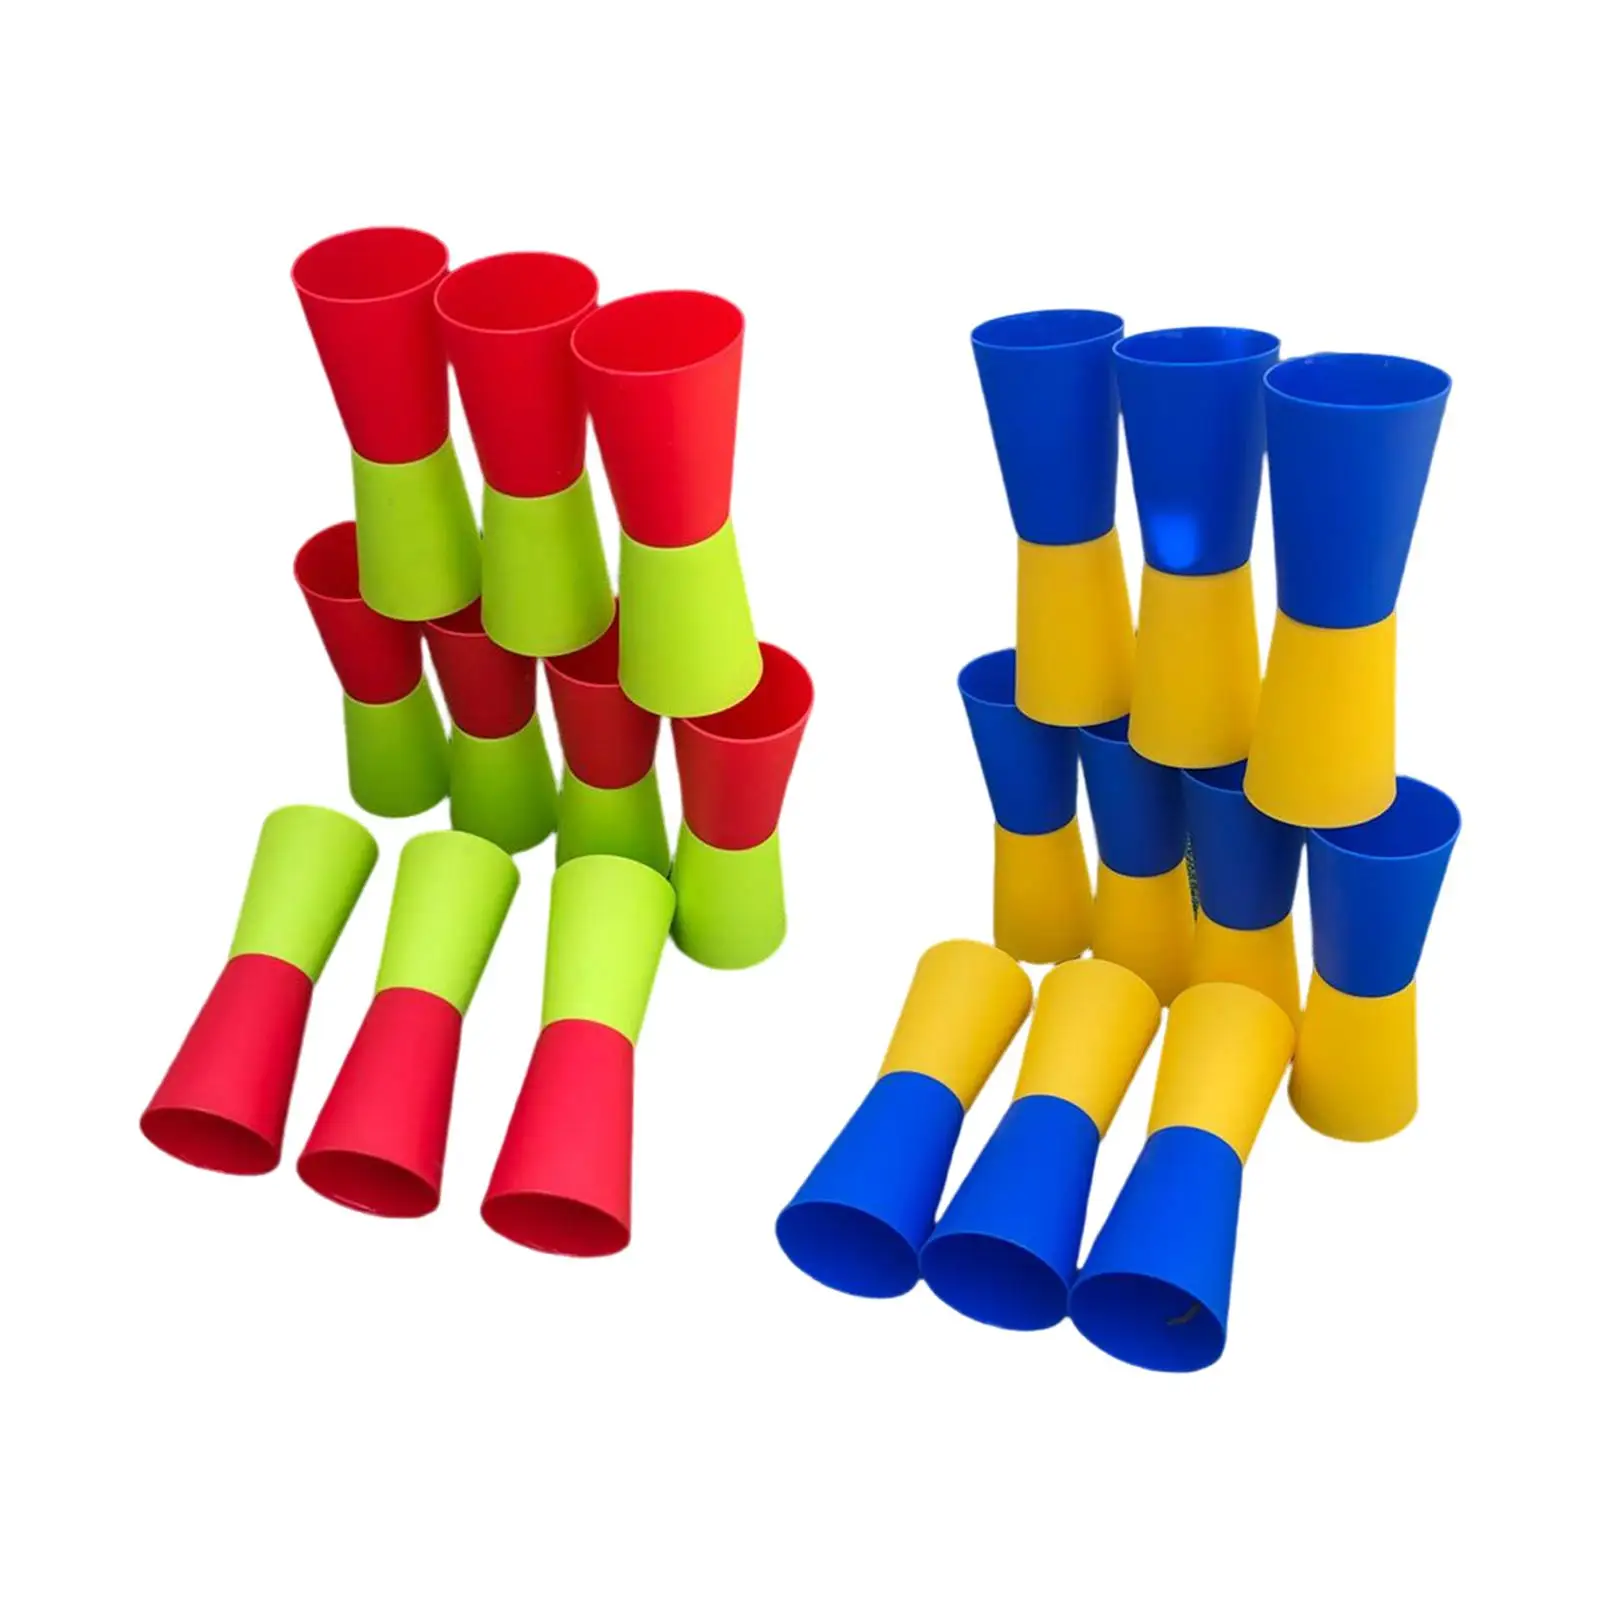 10Pcs Flip Cups Agility Training Workout Body Coordination Sensory Integration Exercise Reversed Cups for Indoor Events